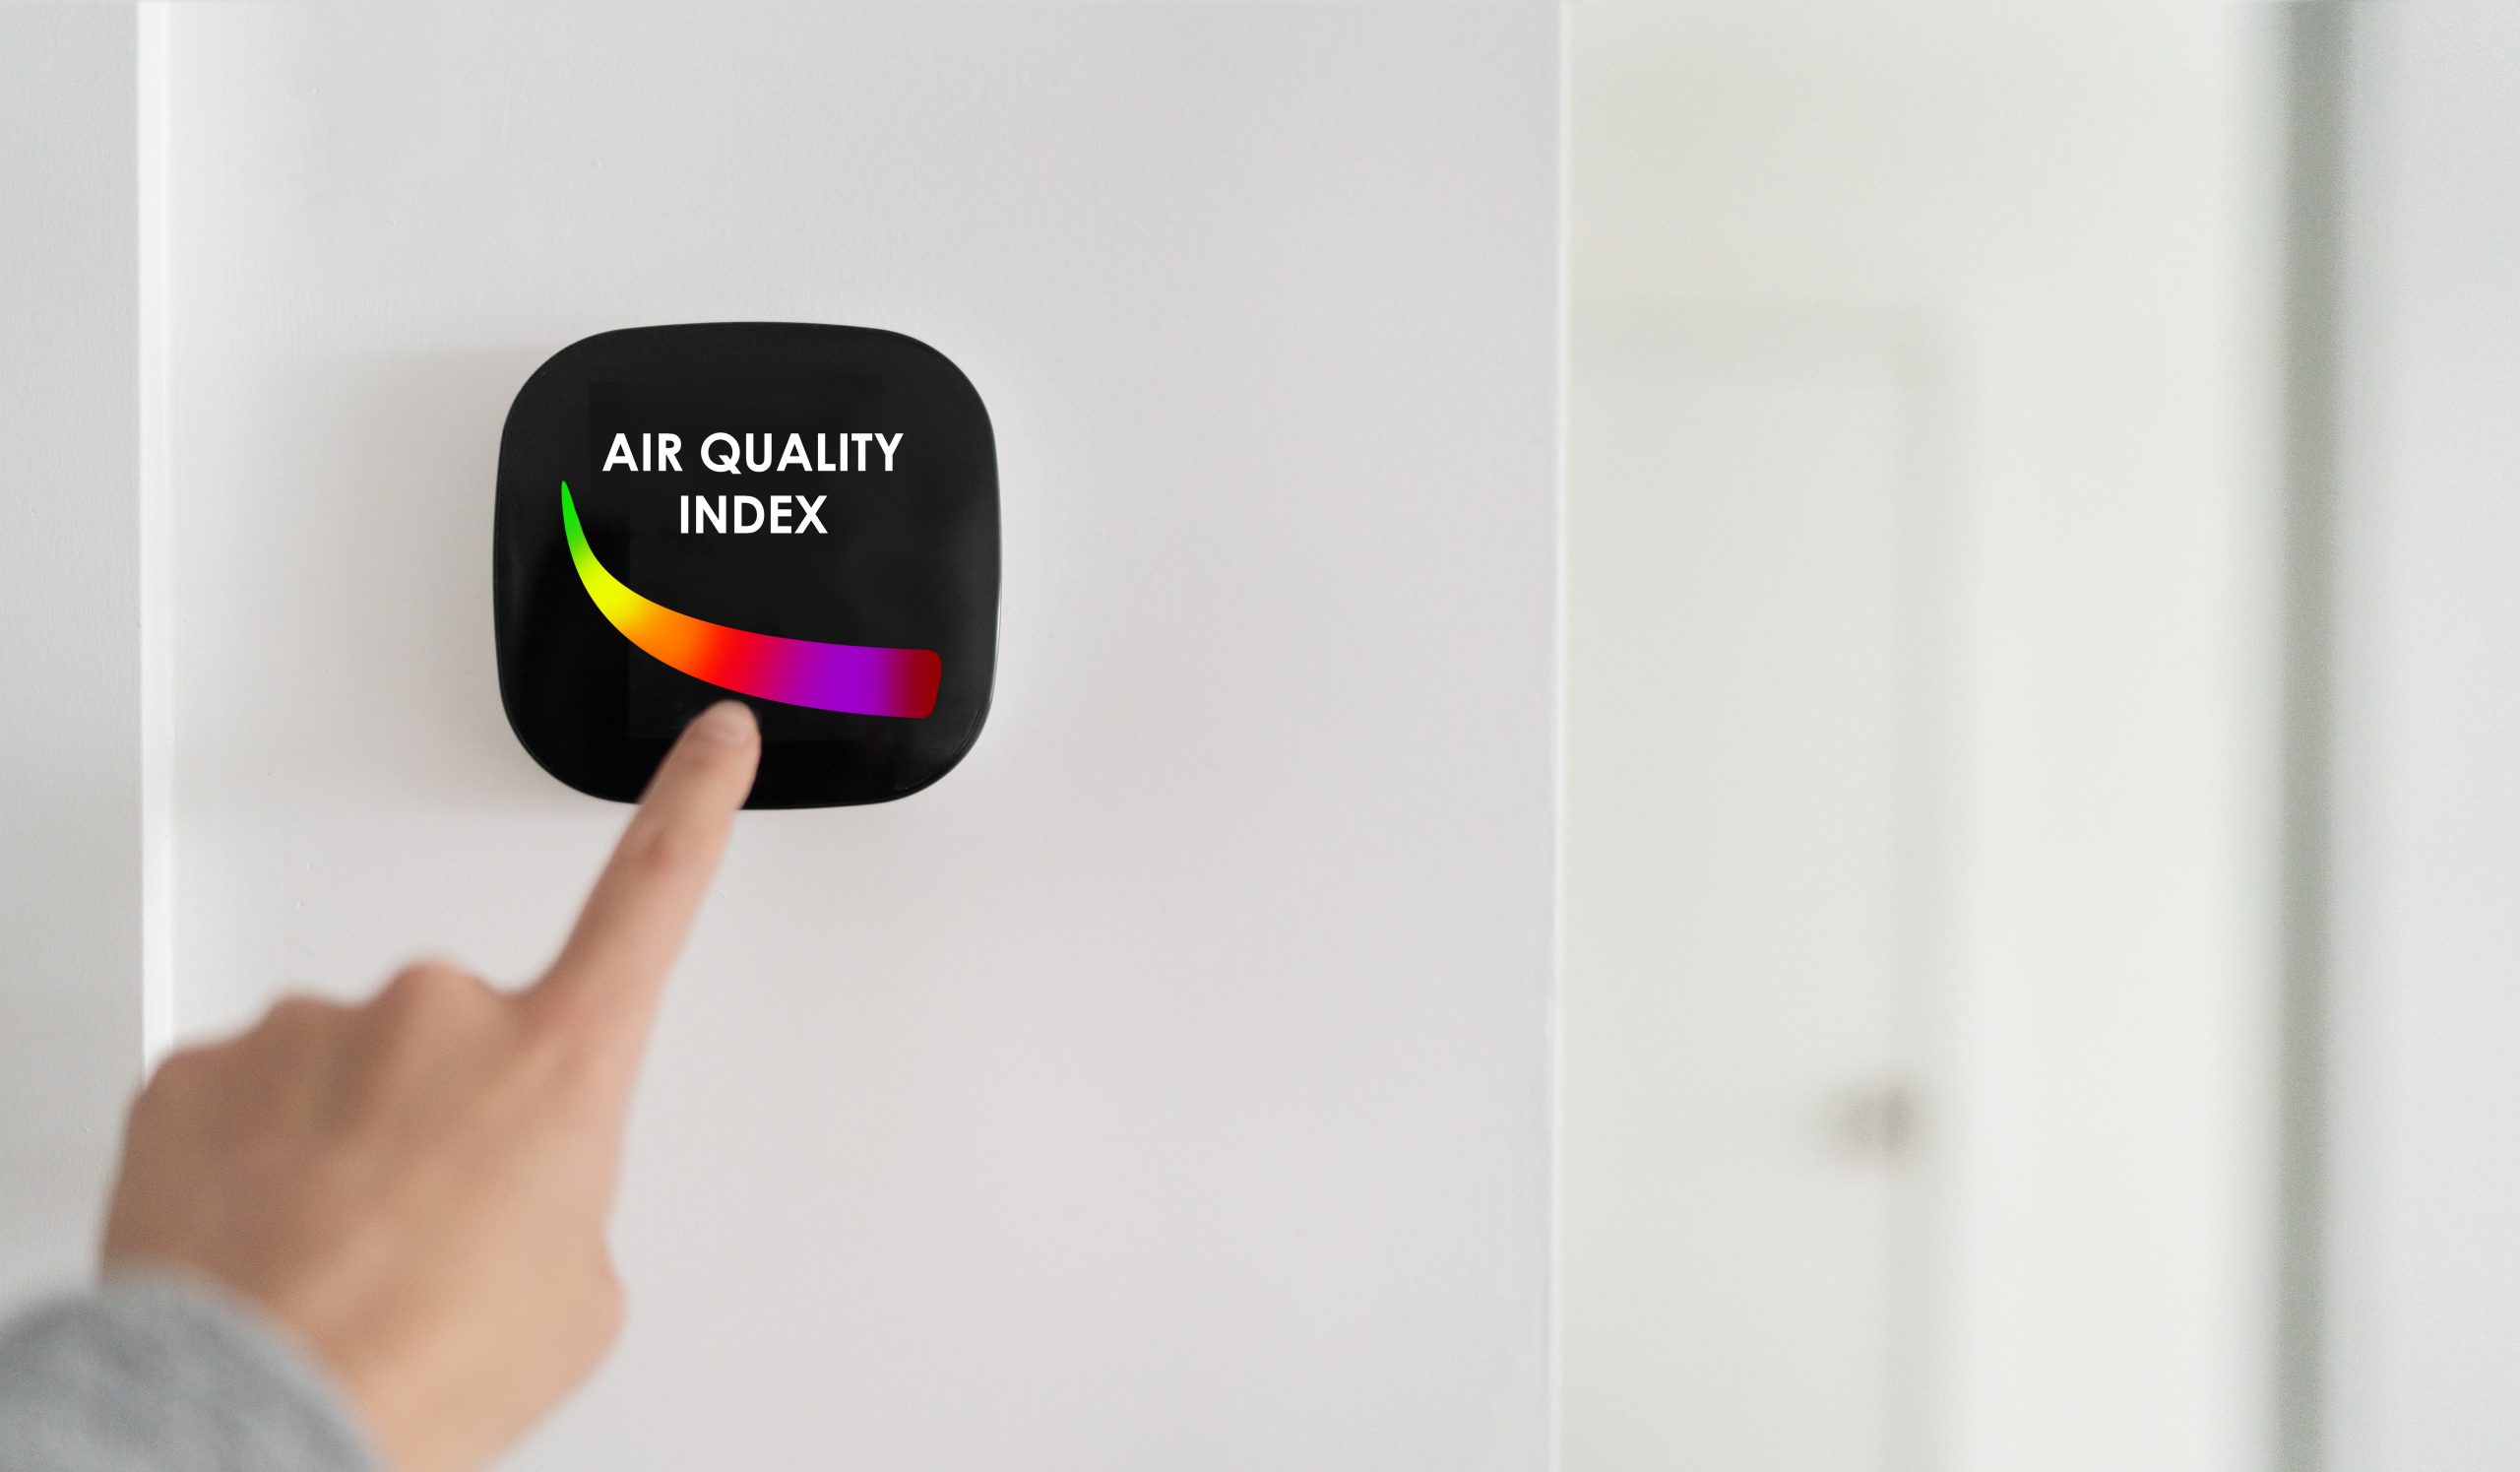 Air quality index showing on smart home domotic tech device. Woman touching touchscreen for clean air breathing purifying filter.